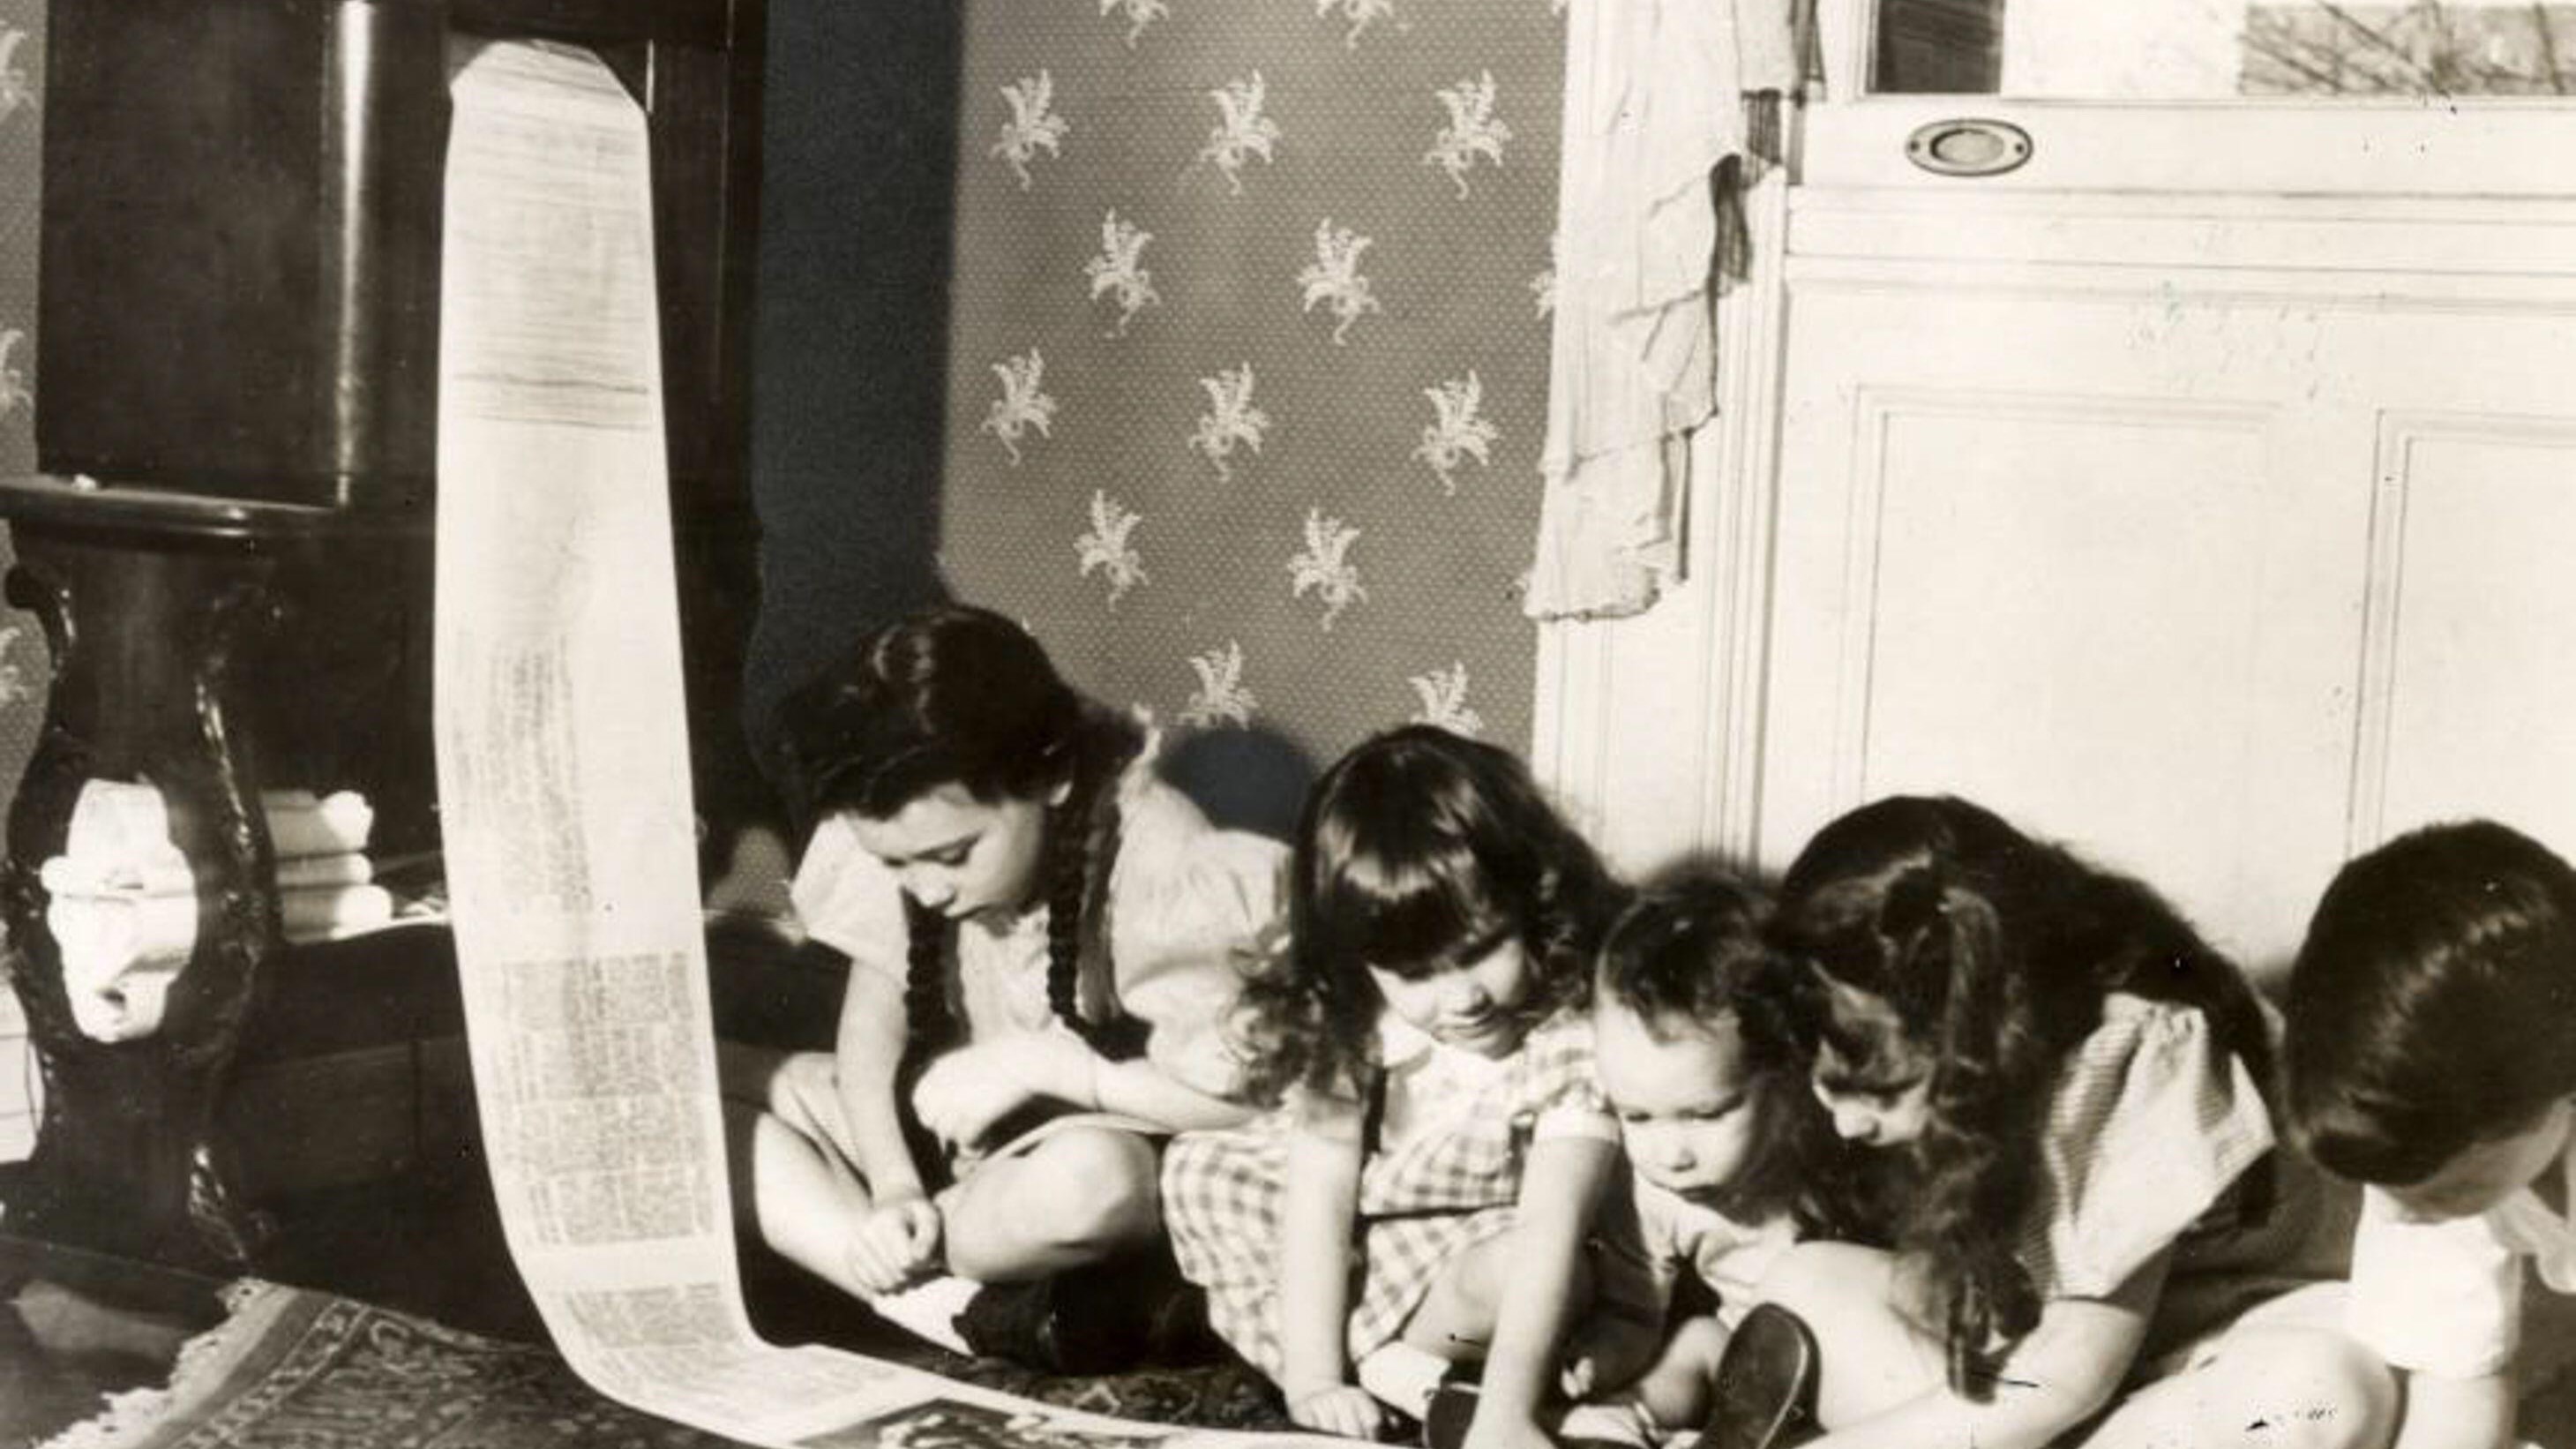 Children kneel on the floor to read a radio newspaper that is being printed.